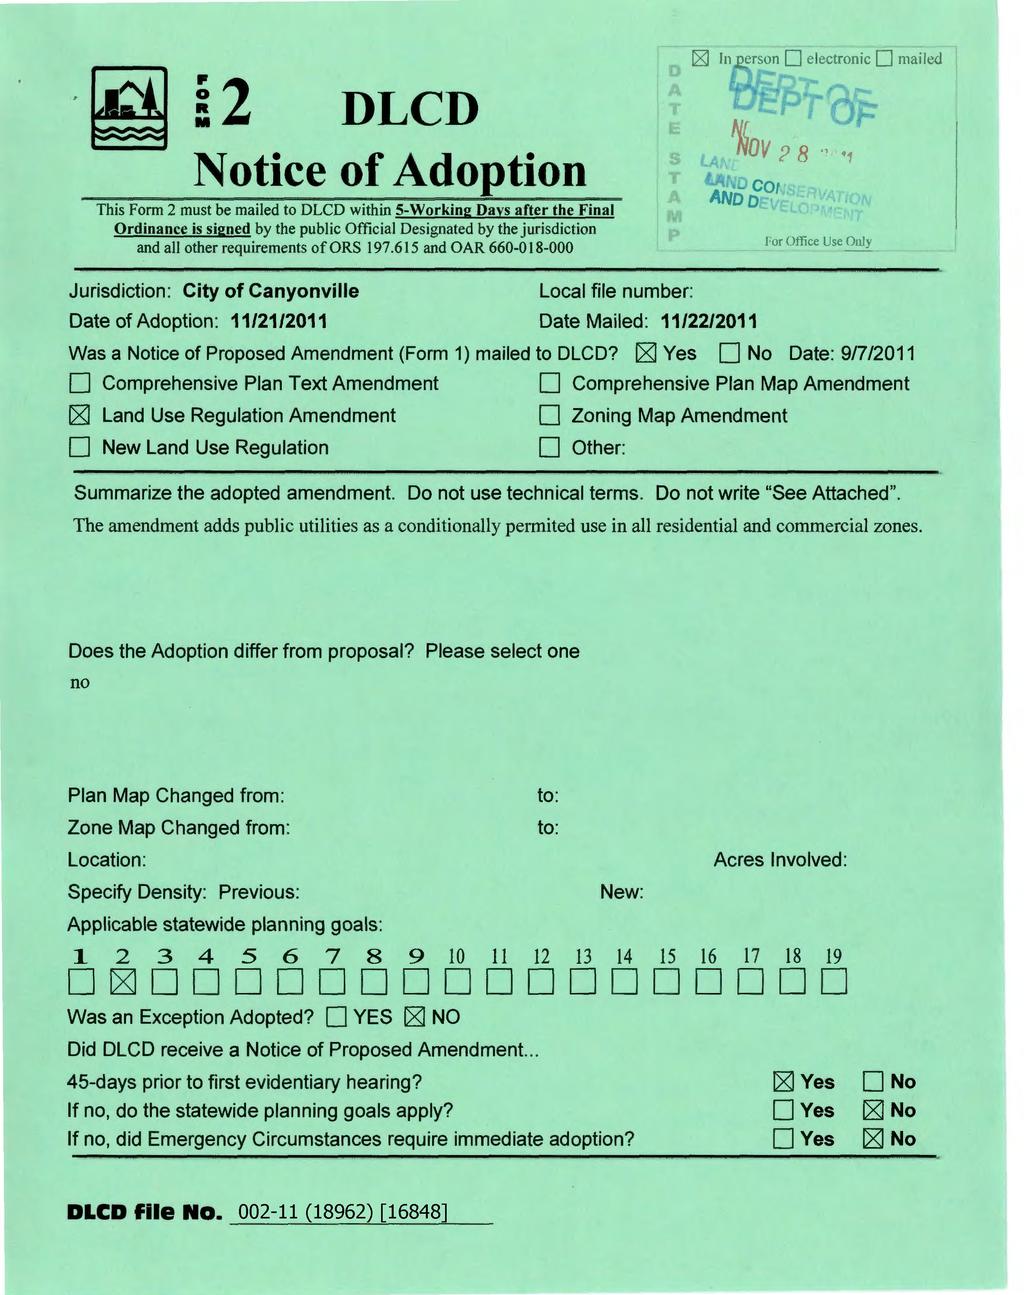 12 DLCD Notice of Adoption^ This Form 2 must be mailed to DLCD within 5-Working Pays after the Final Ordinance is signed by the public Official Designated by the jurisdiction and all other